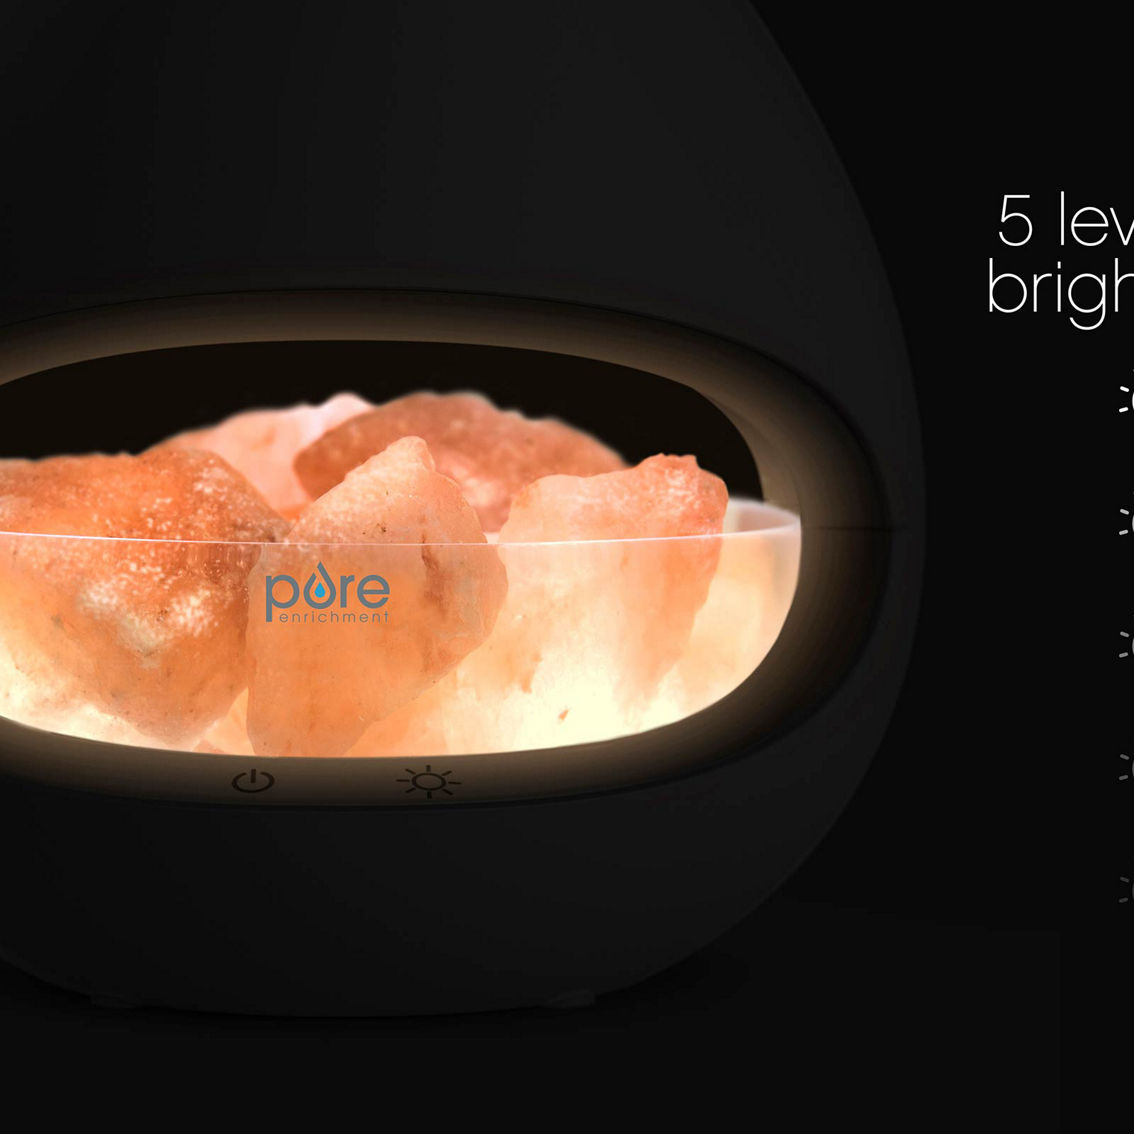 Pure Enrichment Pure Glow Crystal Himalayan Salt Rock Lamp and Ultrasonic Diffuser - Image 5 of 8